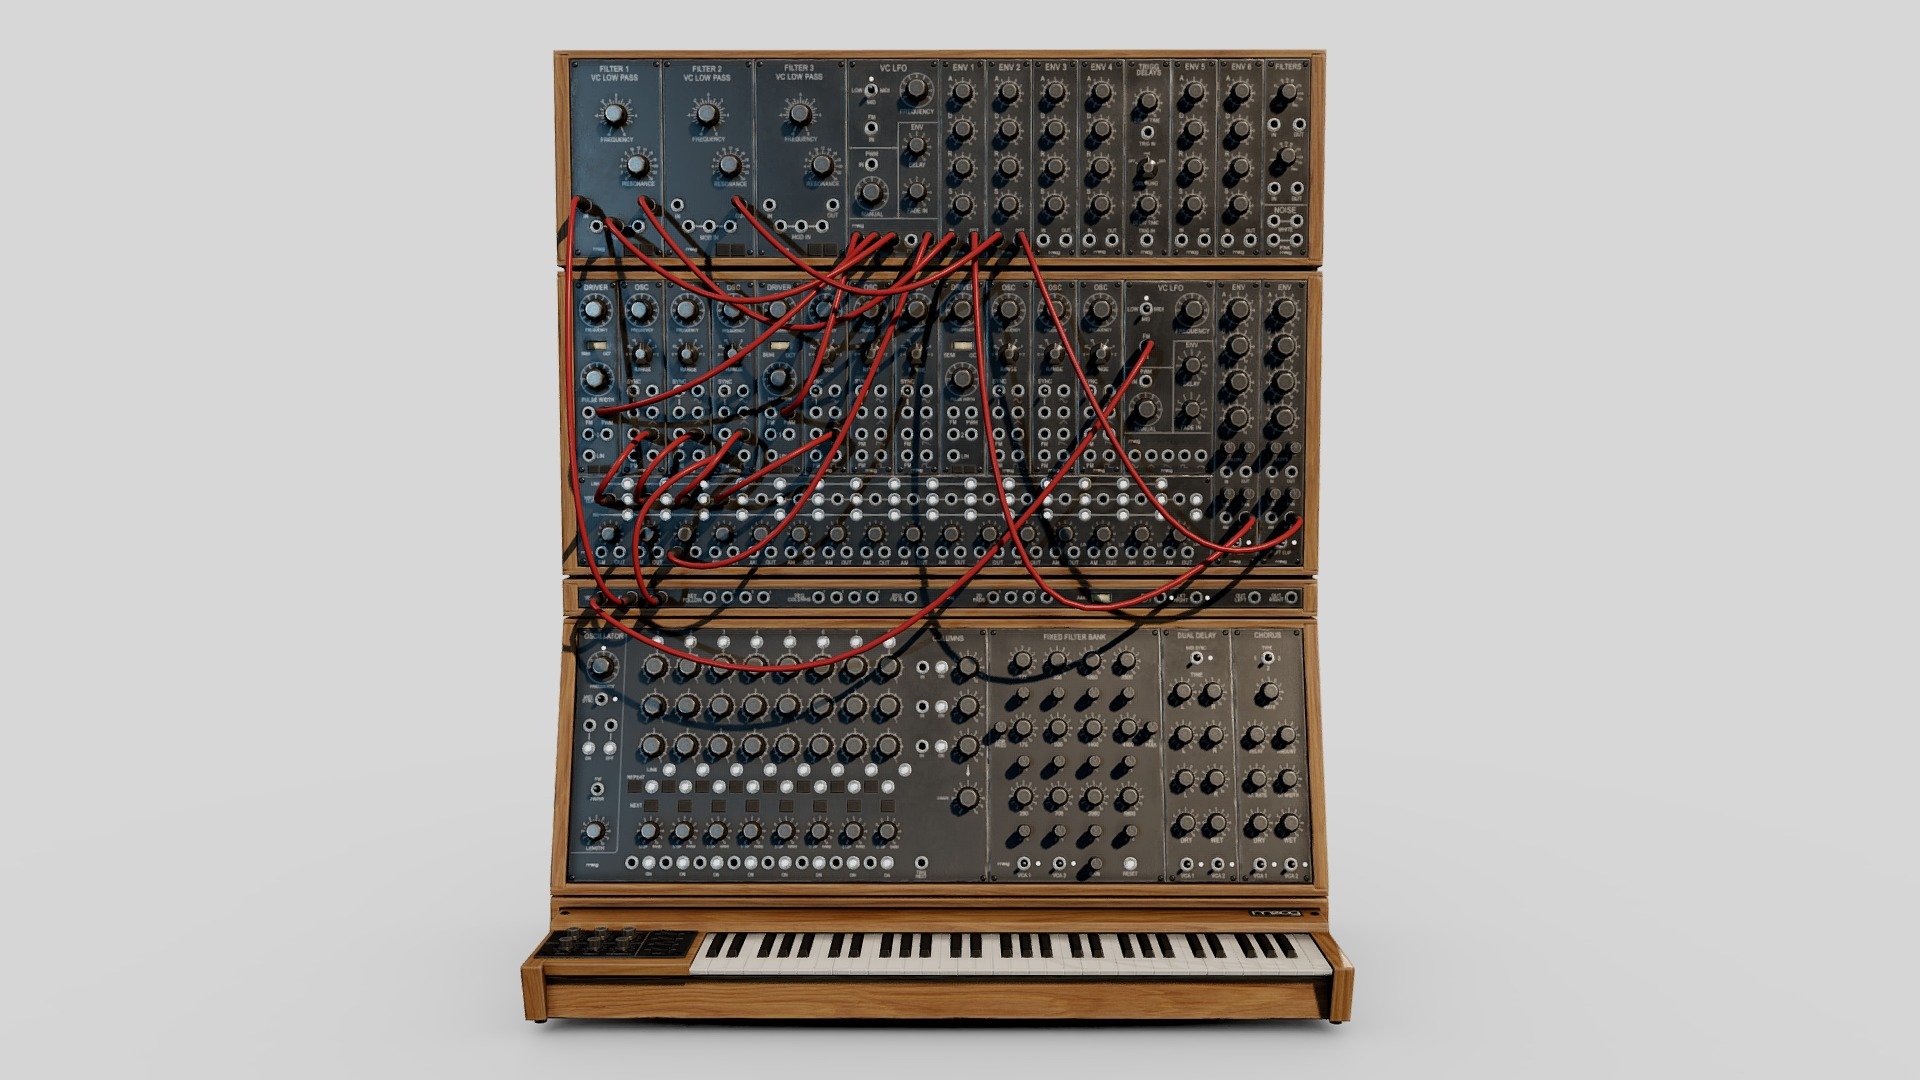 Renders and more info available on my artstation: https://www.artstation.com/artwork/LR55E0

I've been wanting to make a modular synth for a really long time and I finally had some free time to put this together. Spent a pretty wild amount of time making sure that every knob and icon were accurate. Very fun project, excited for the next!

If you'd like to download it, the textures and model are designed so that all the knobs and keys are movable. Thanks! - Moog System 55 - Download Free 3D model by Kendrick Russell (@Buce) 3d model